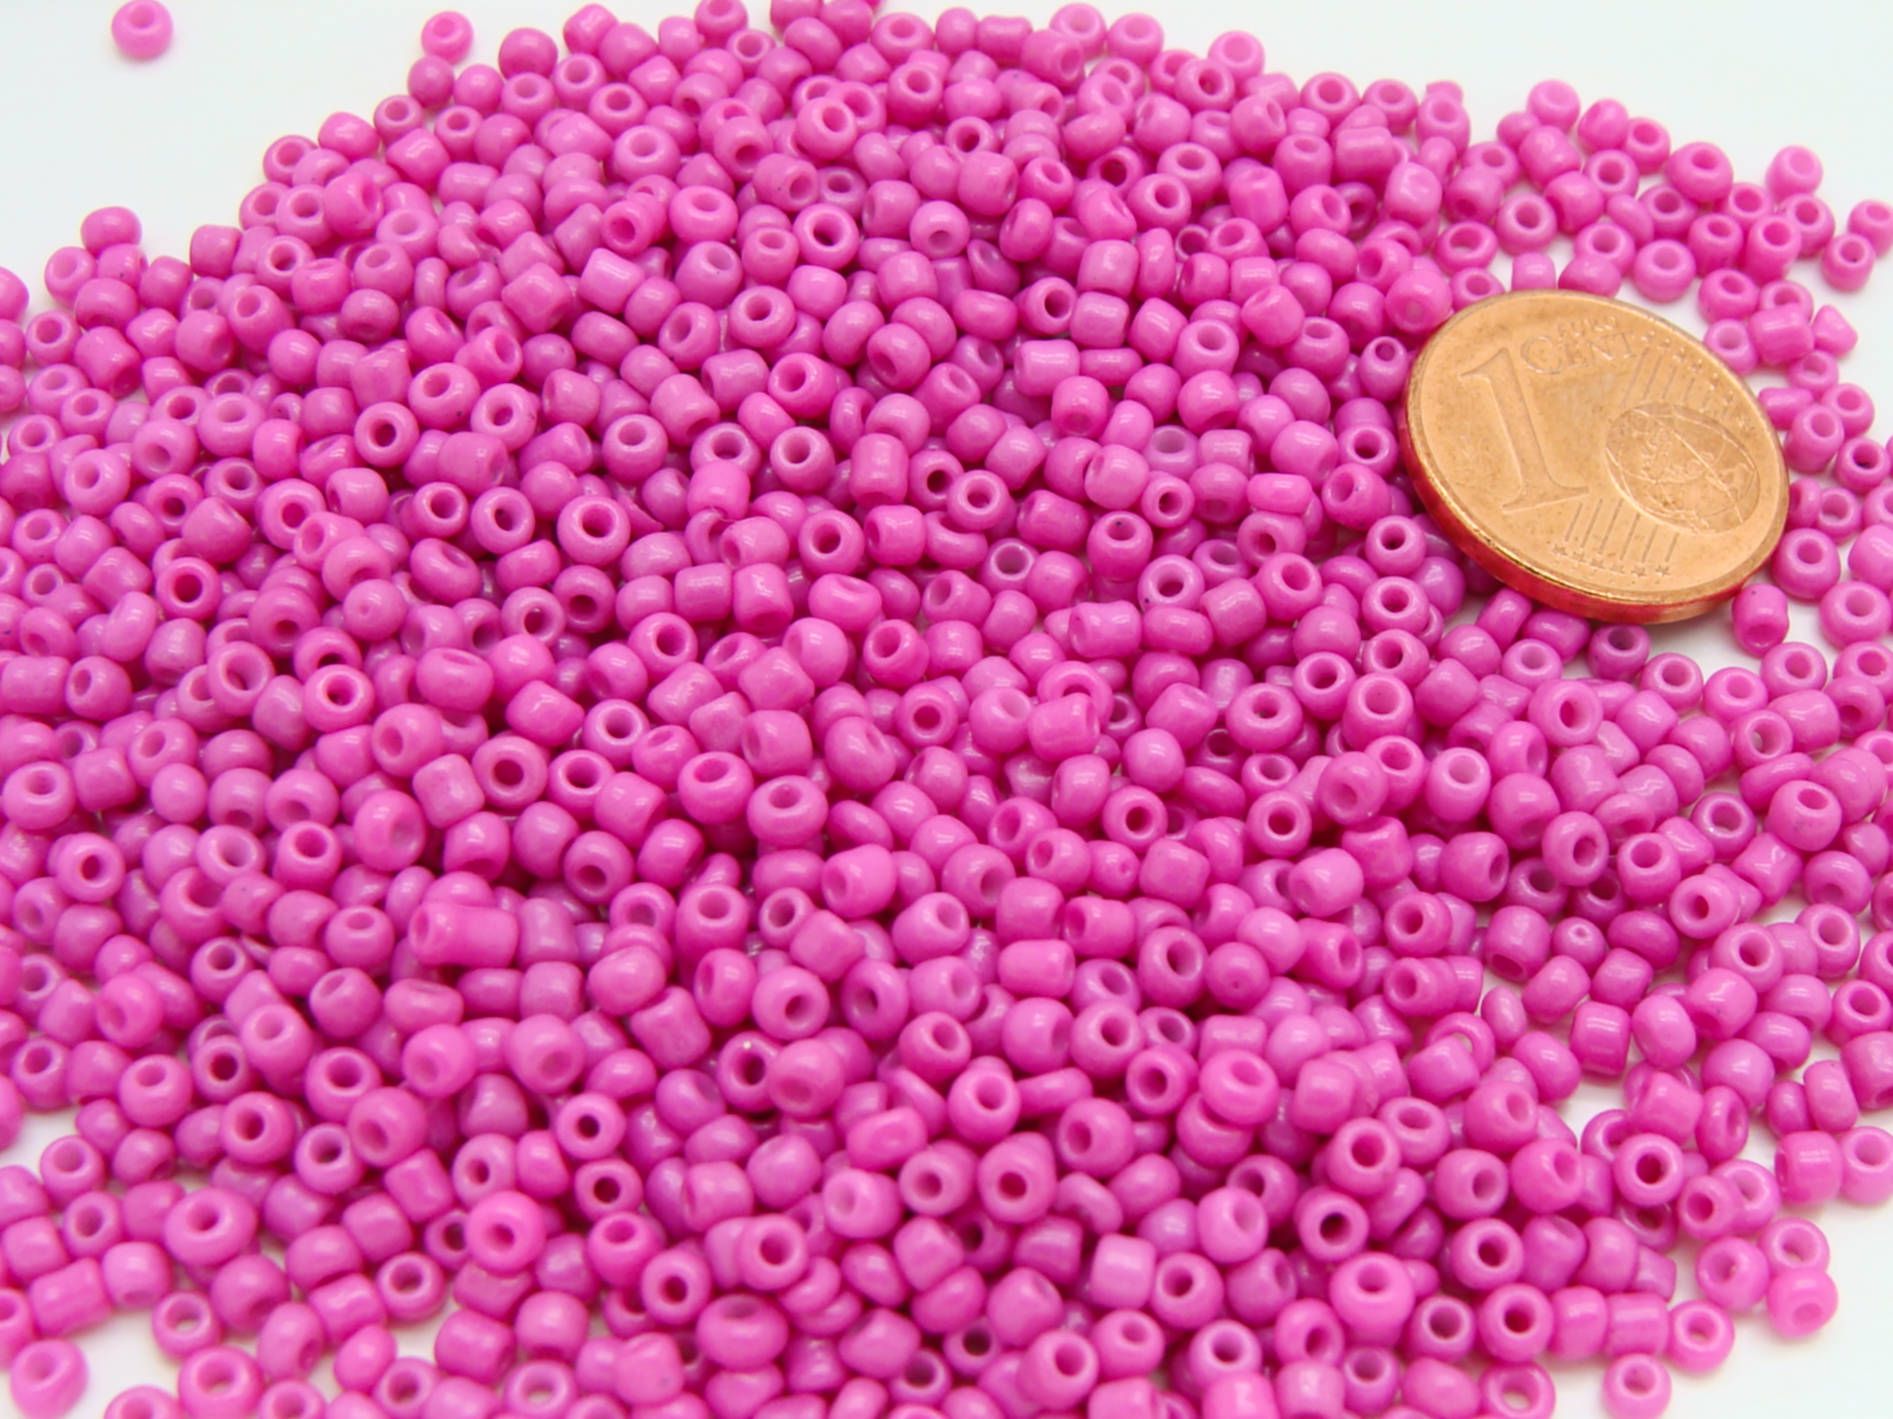 perle rocaille opaque 2mm rose fonce verre